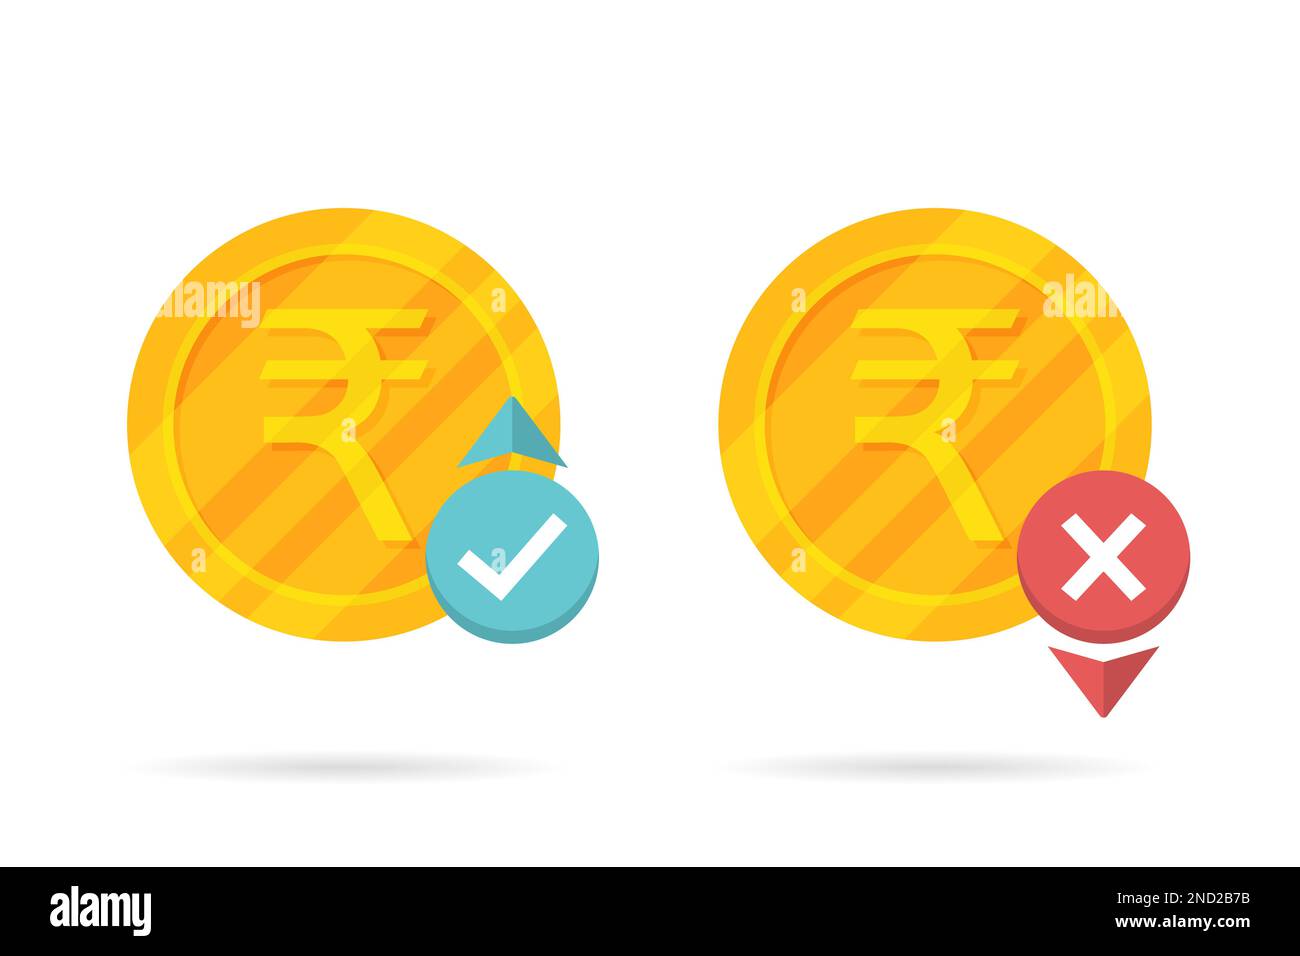 Up and down rupee money icon with shadow Stock Vector